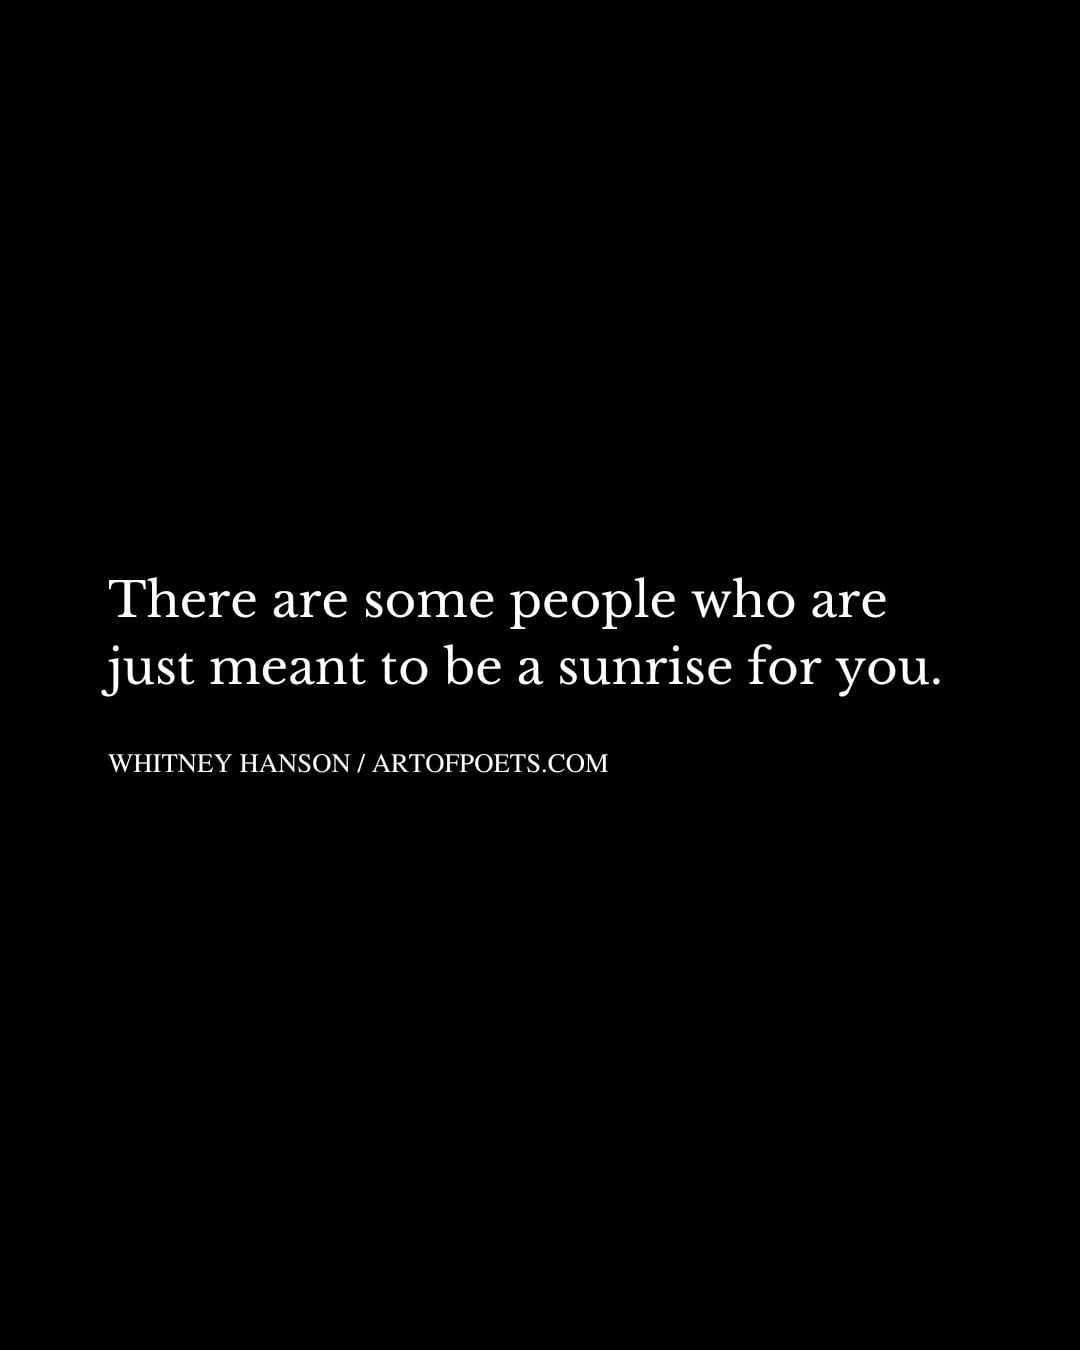 There are some people who are just meant to be a sunrise for you